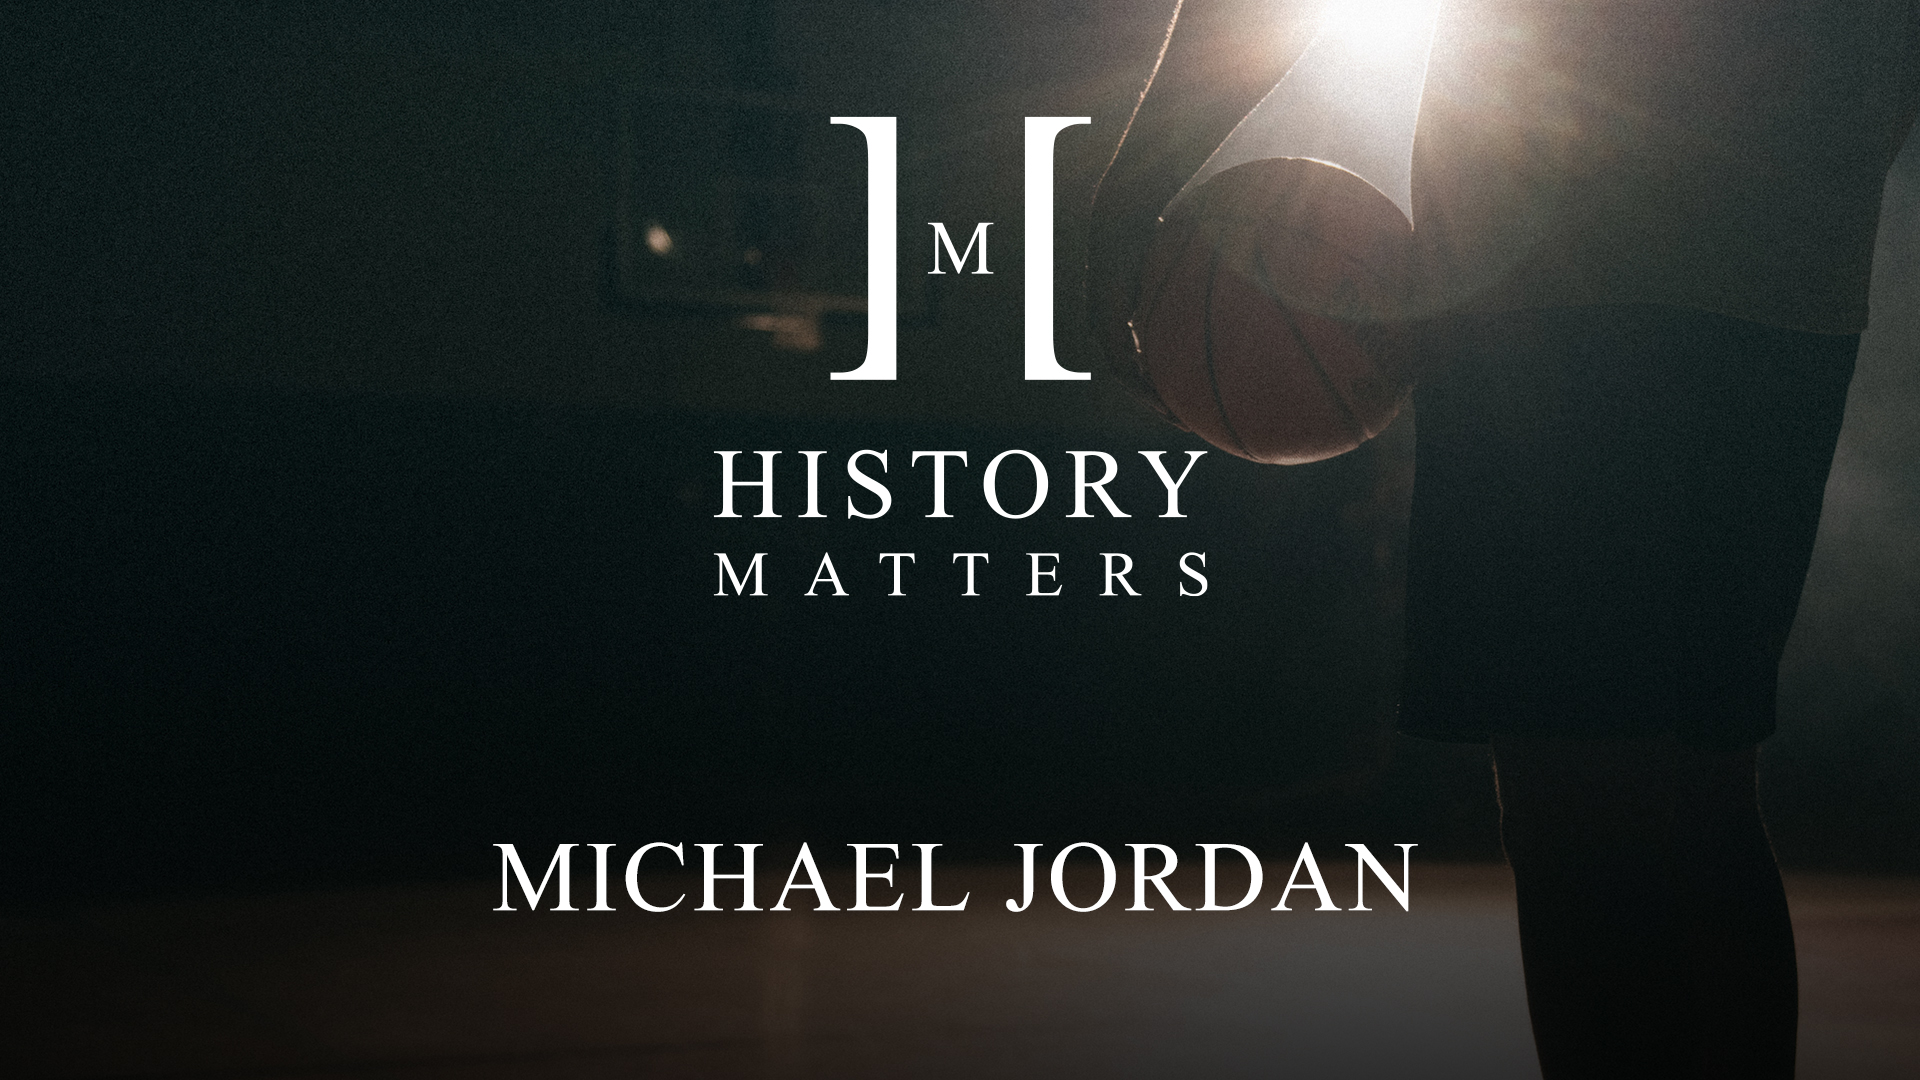 White History Matters Michael Jordan logo by Charlie Villanueva with closeup of a man holding a basketball on a basketball court